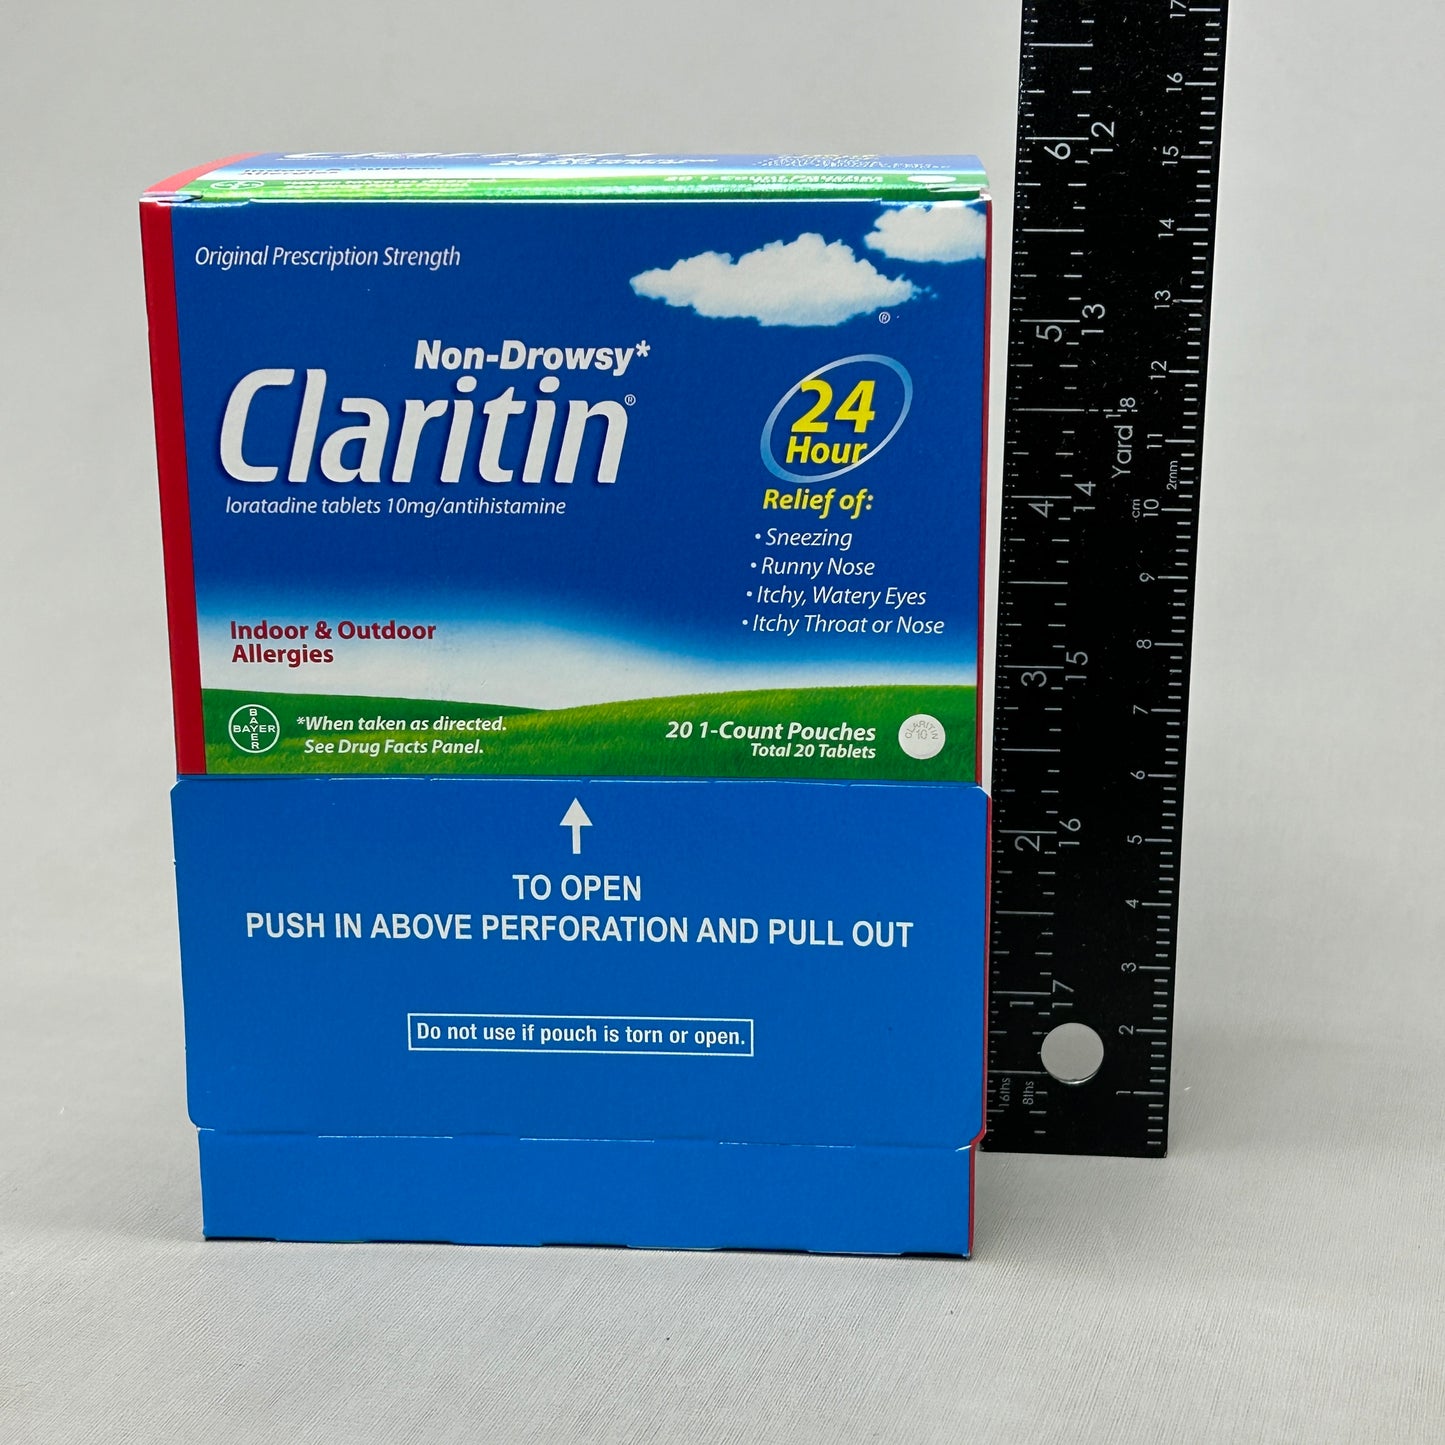 CLARITIN Non-Drowsy Loratadine Tablets 24 Hour Indoor & Outdoor Allergies Exp 07/25 (New)